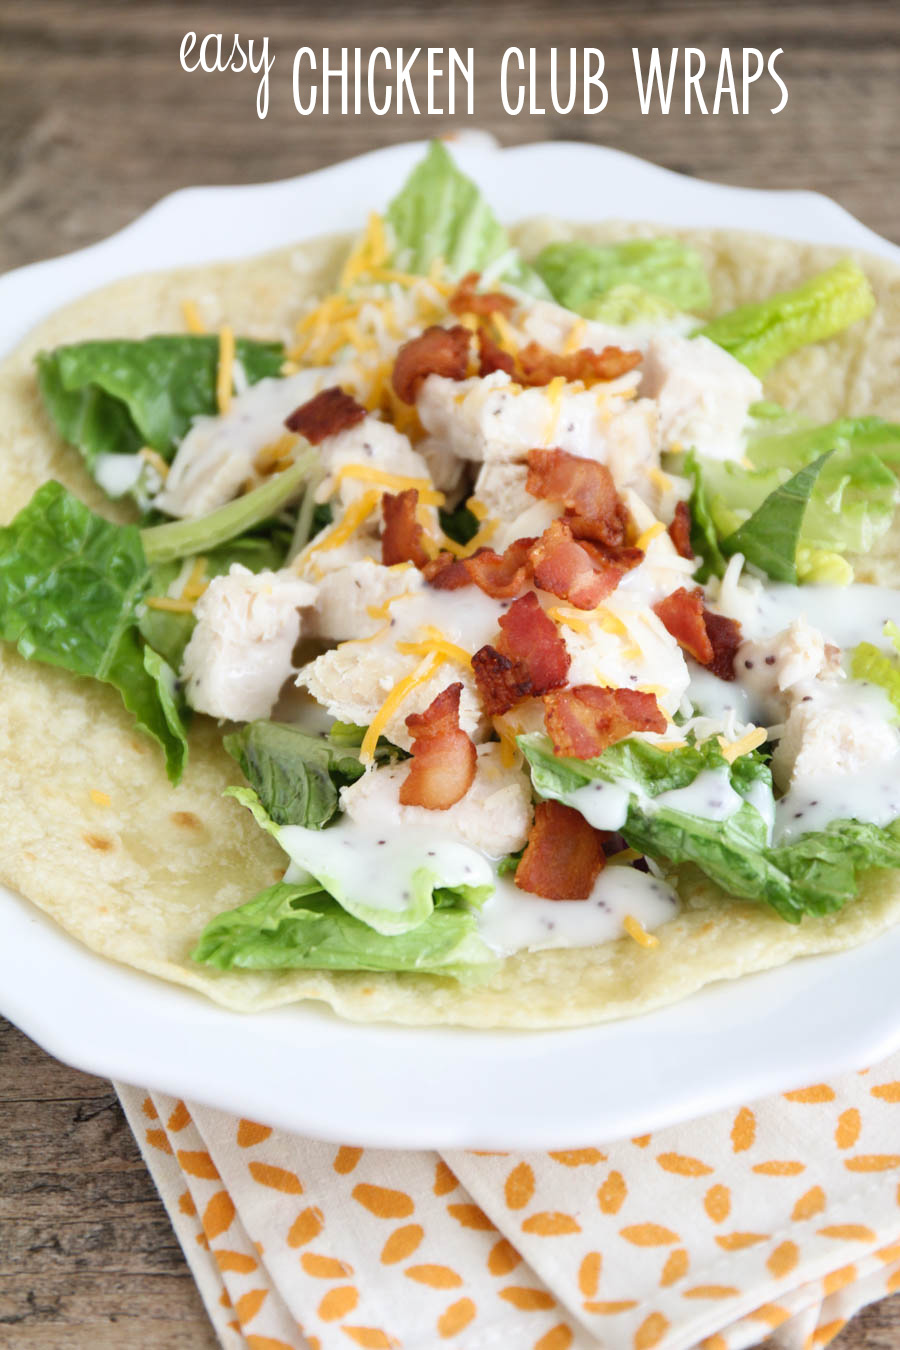 These simple and delicious chicken club wraps are the perfect easy lunch!